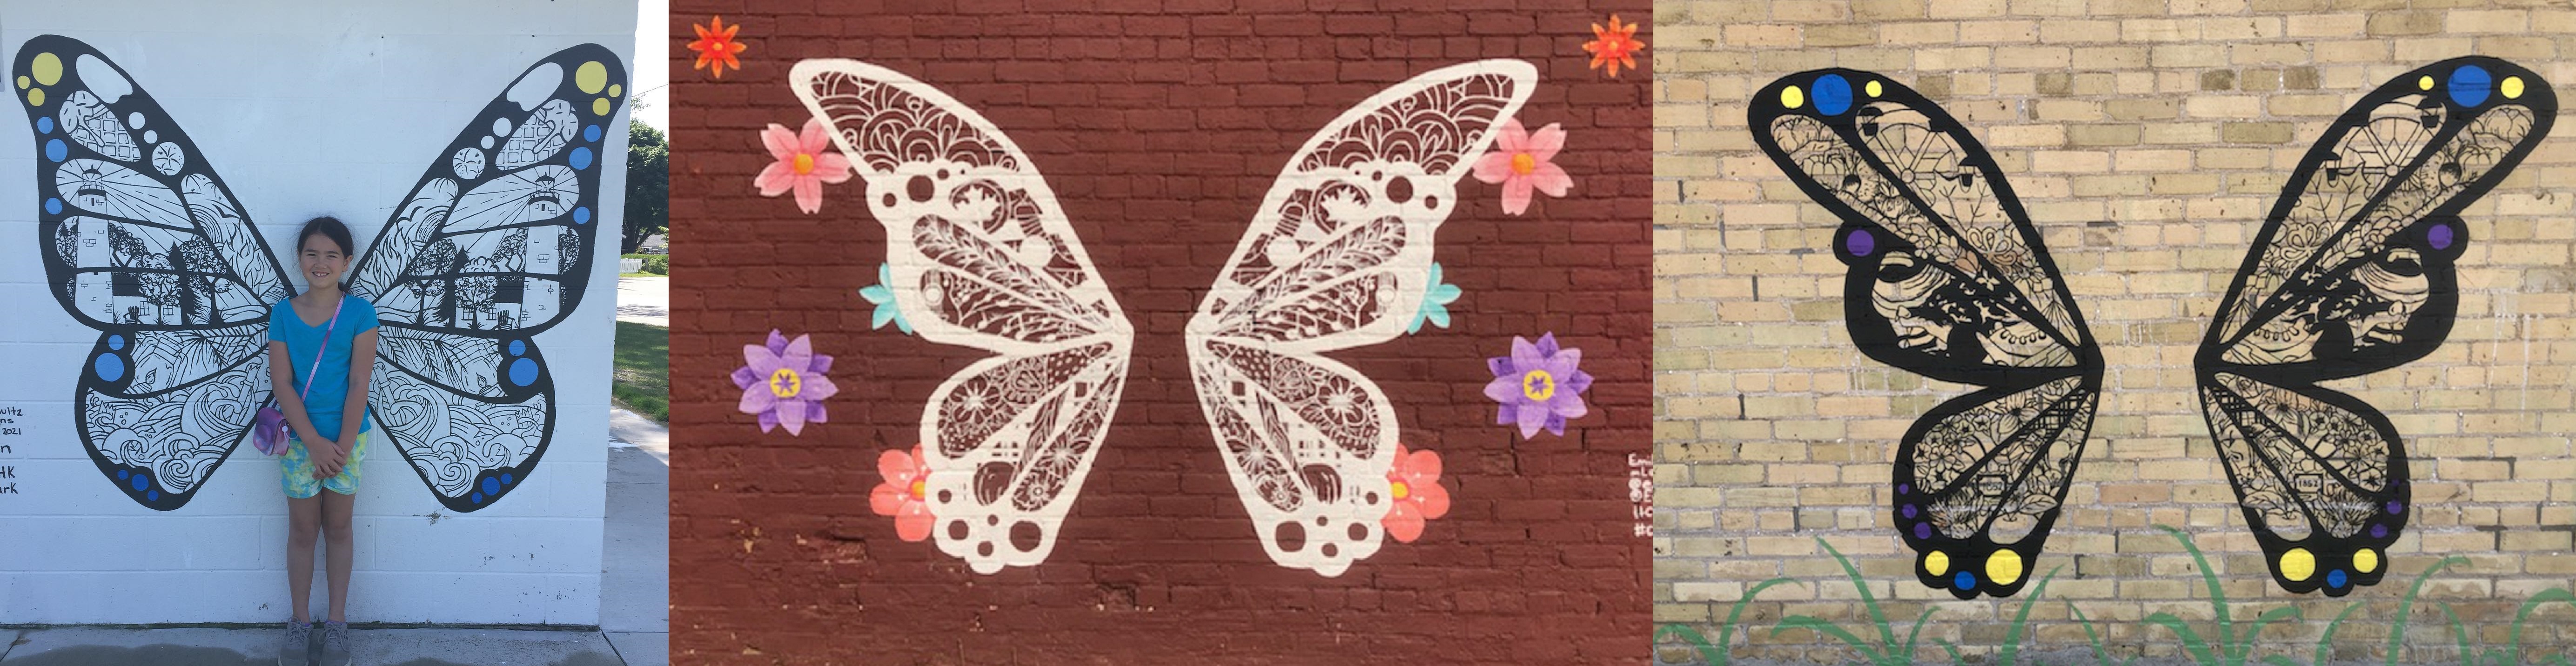 3 butterfly murals on the side of brick buildings